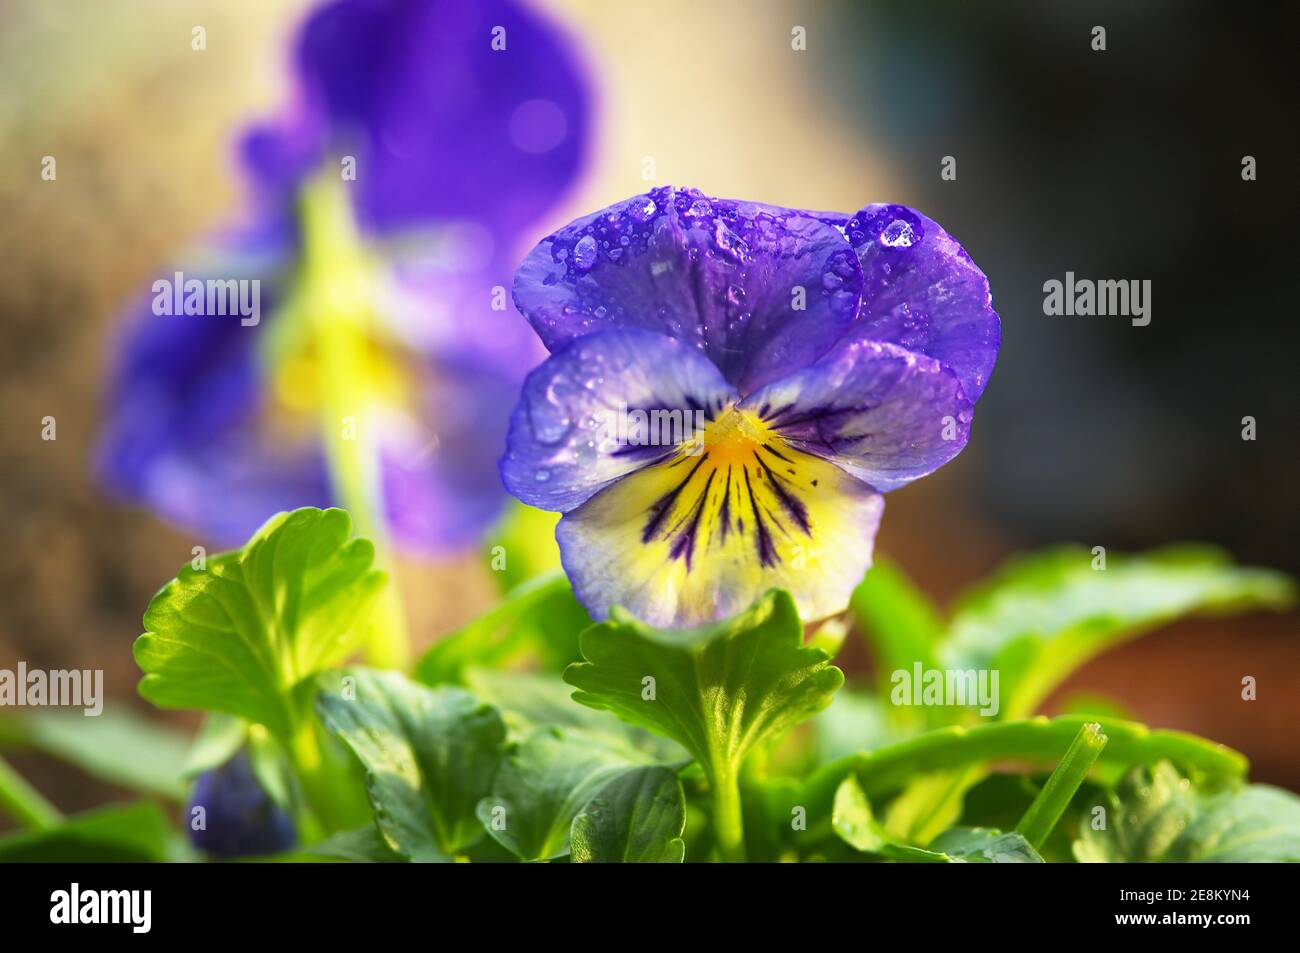 Purple and yellow garden pansy (Viola) with raindrops. Stock Photo